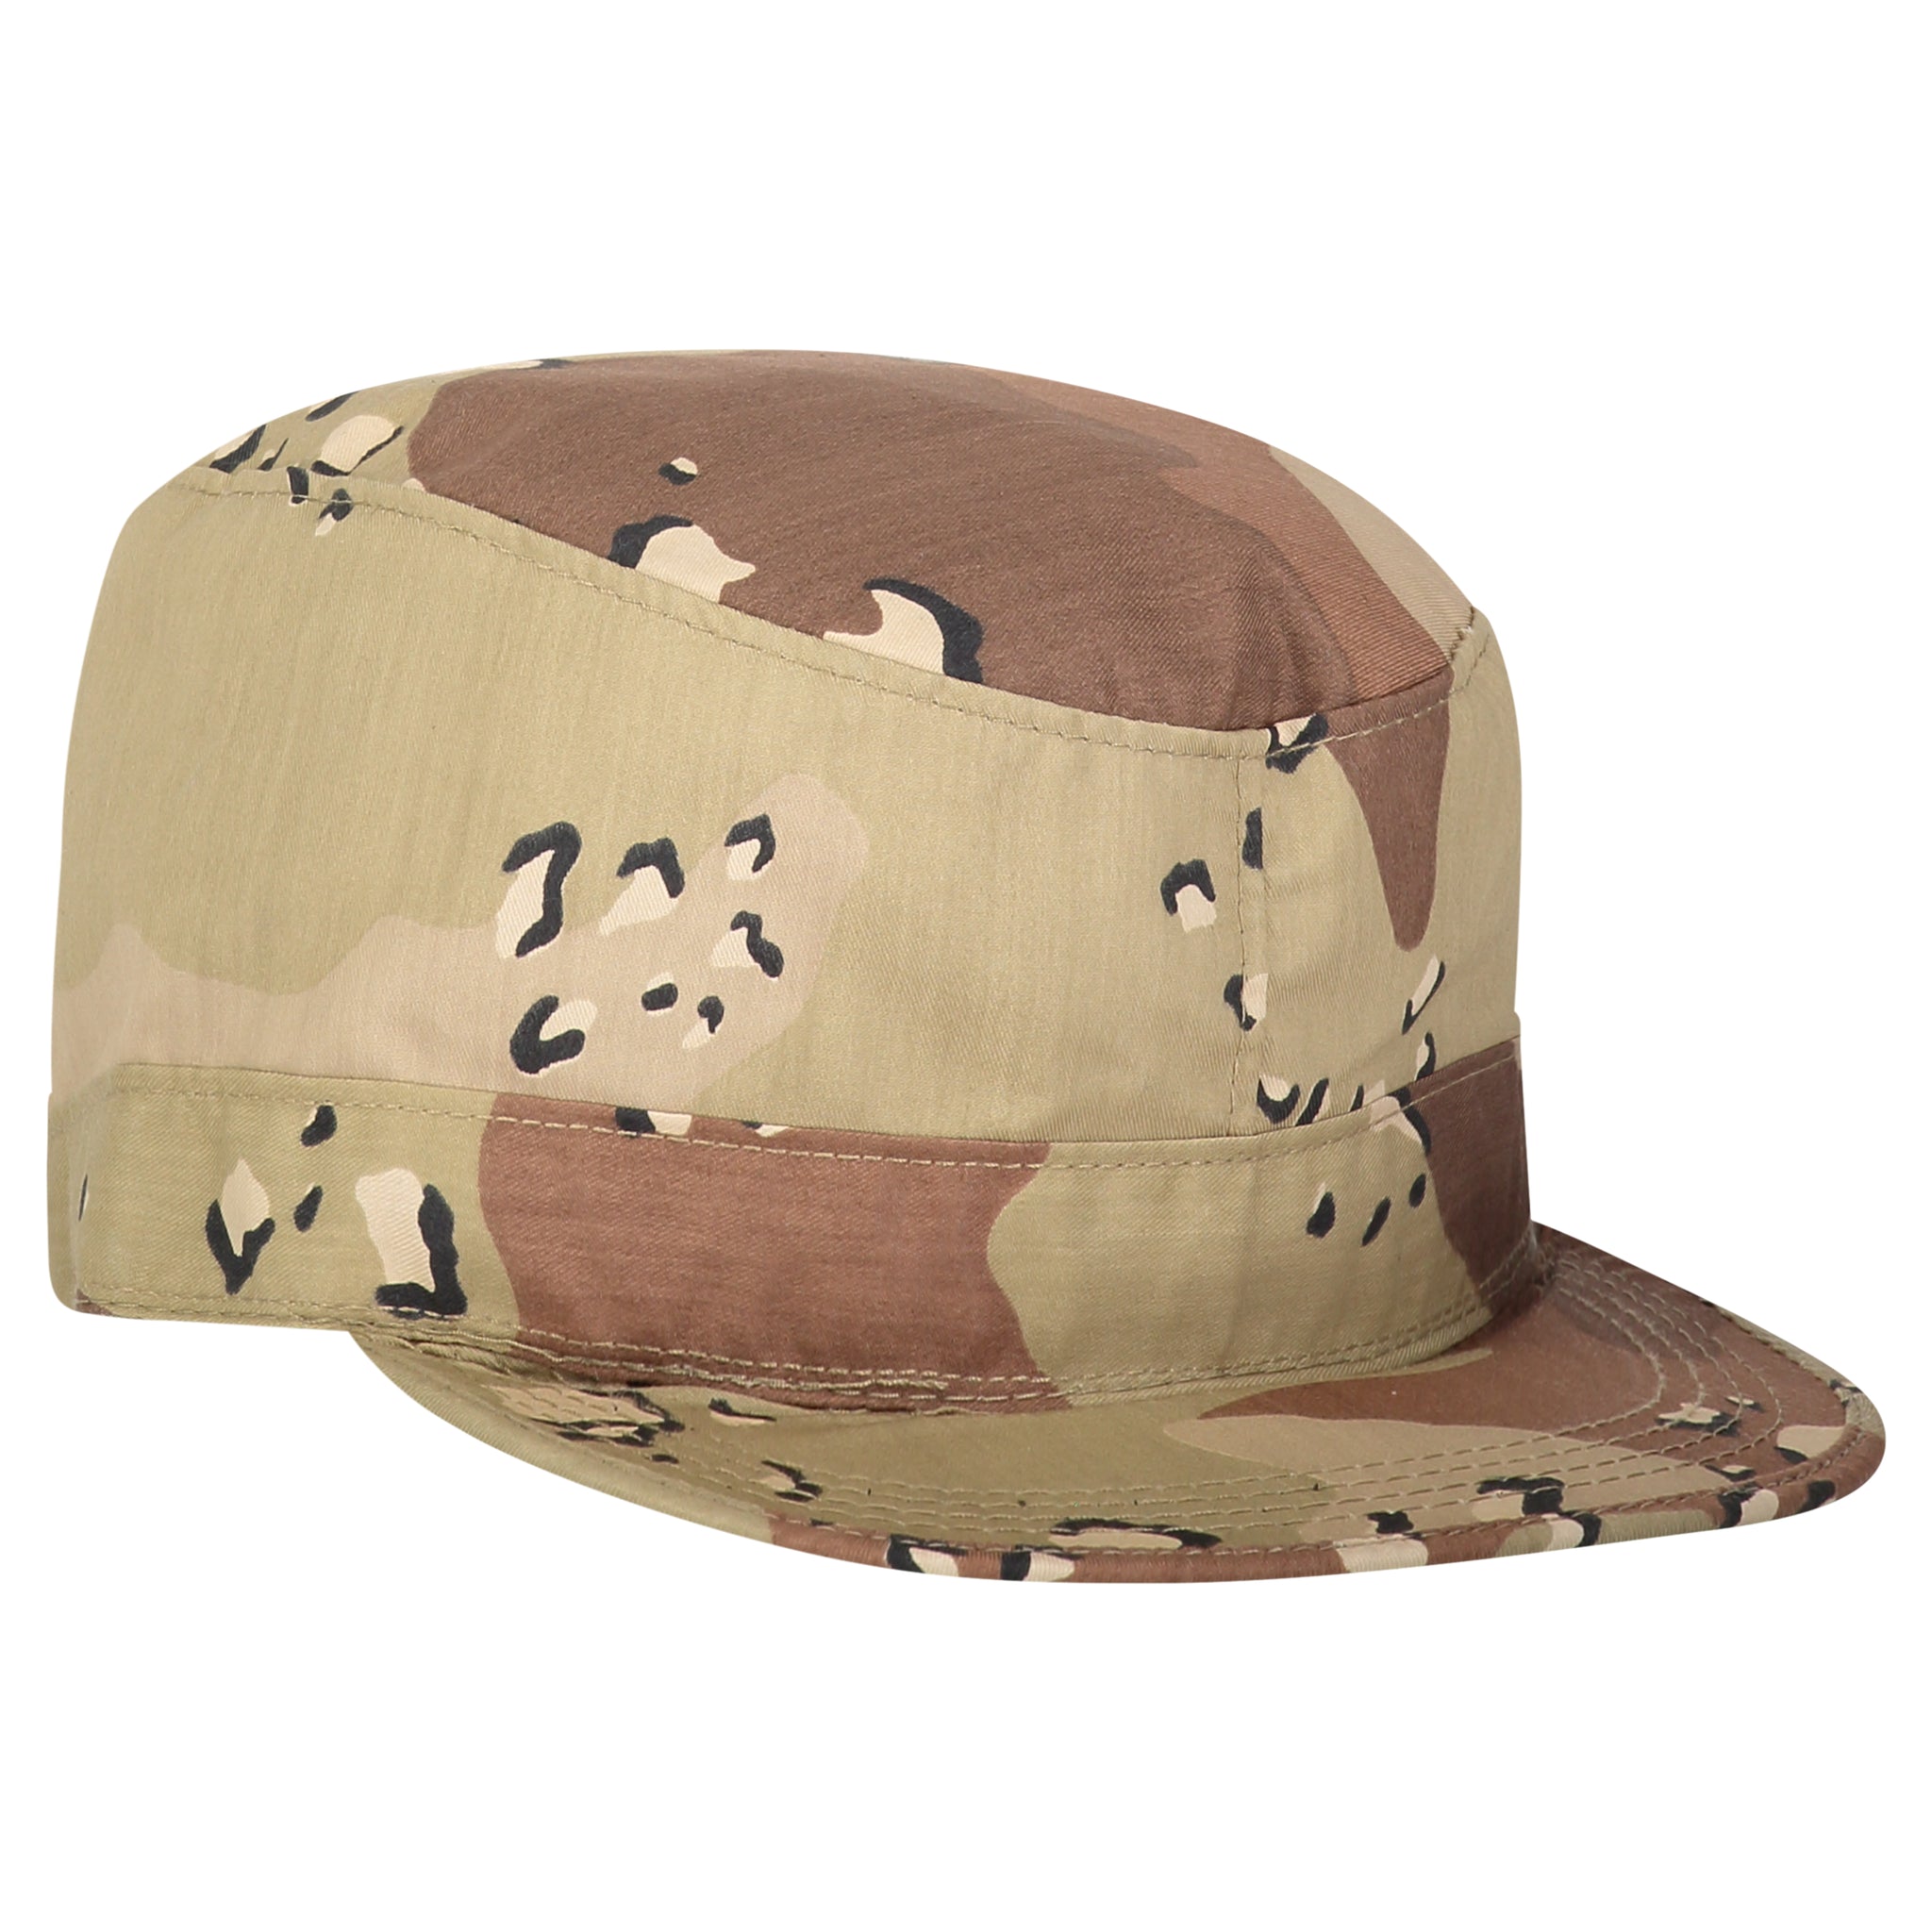 Military Style Combat Cap – McGuire Army Navy